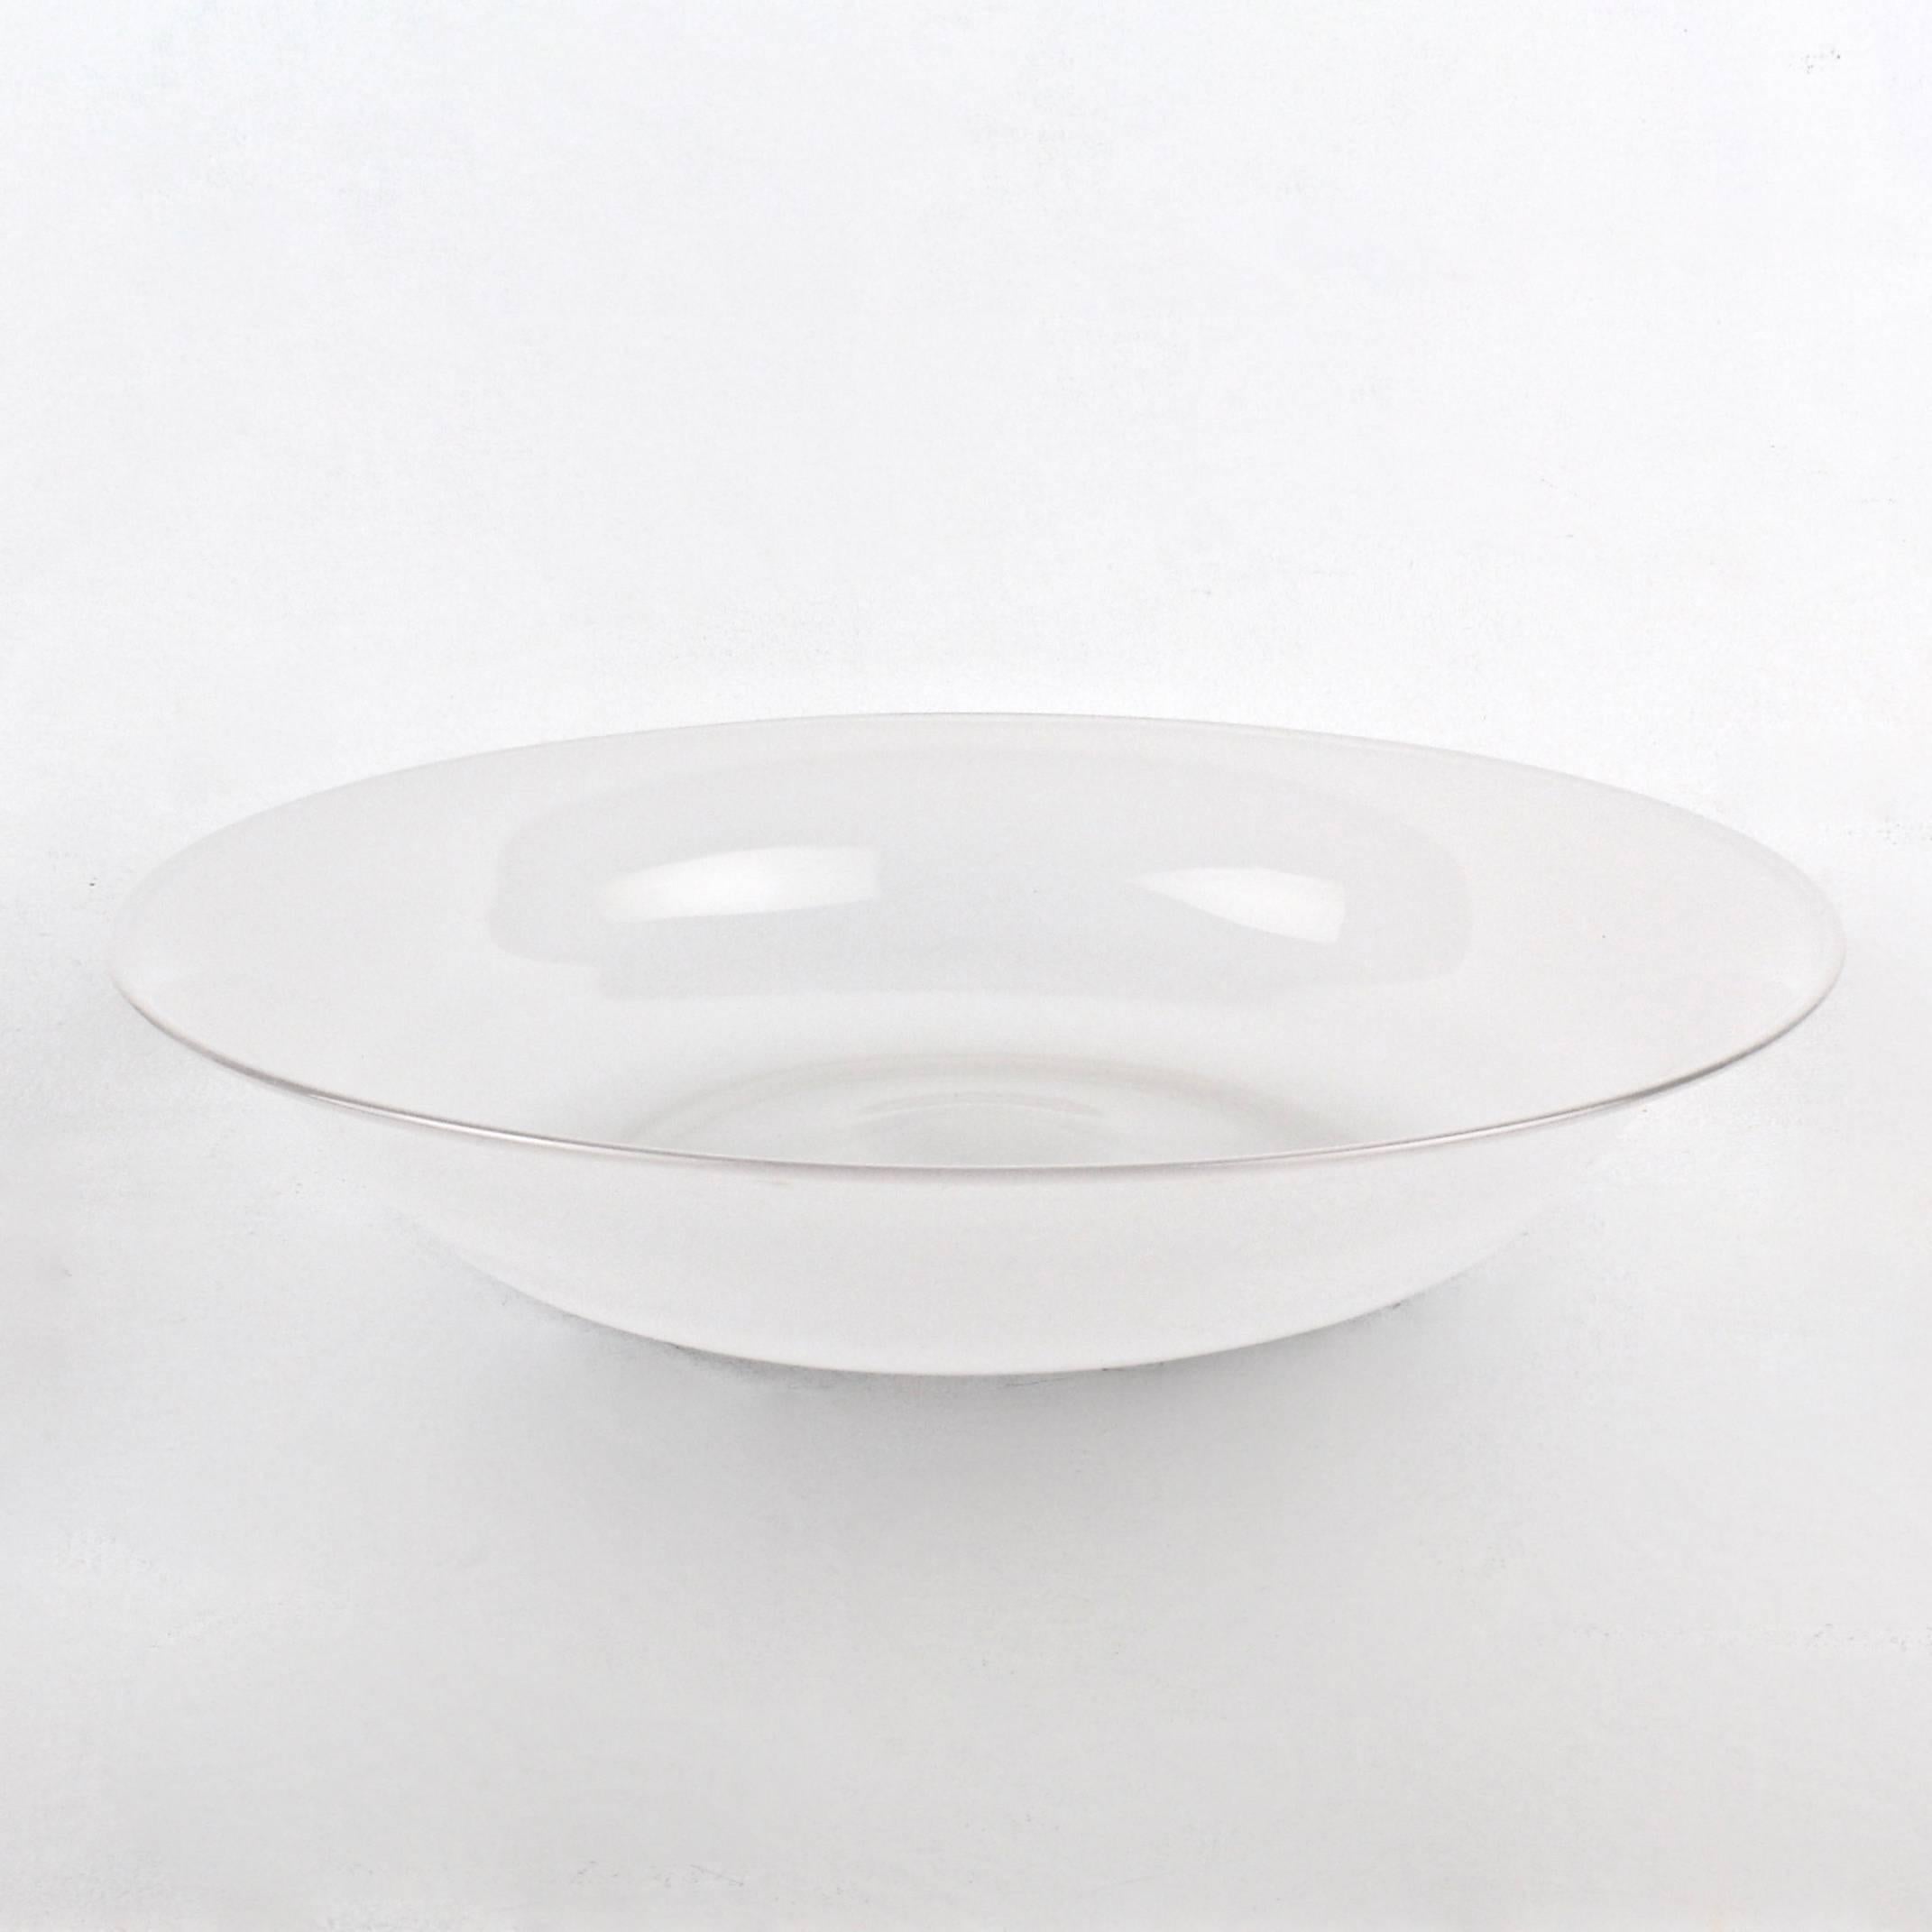 A rare large opaque white glass footed bowl by Venini.

It bears a Mid-Century acid-etched circle mark in the polished pontil to the base. 

Diameter: circa 15.25 in. 

Items purchased from David Sterner antiques must delight you. Purchases